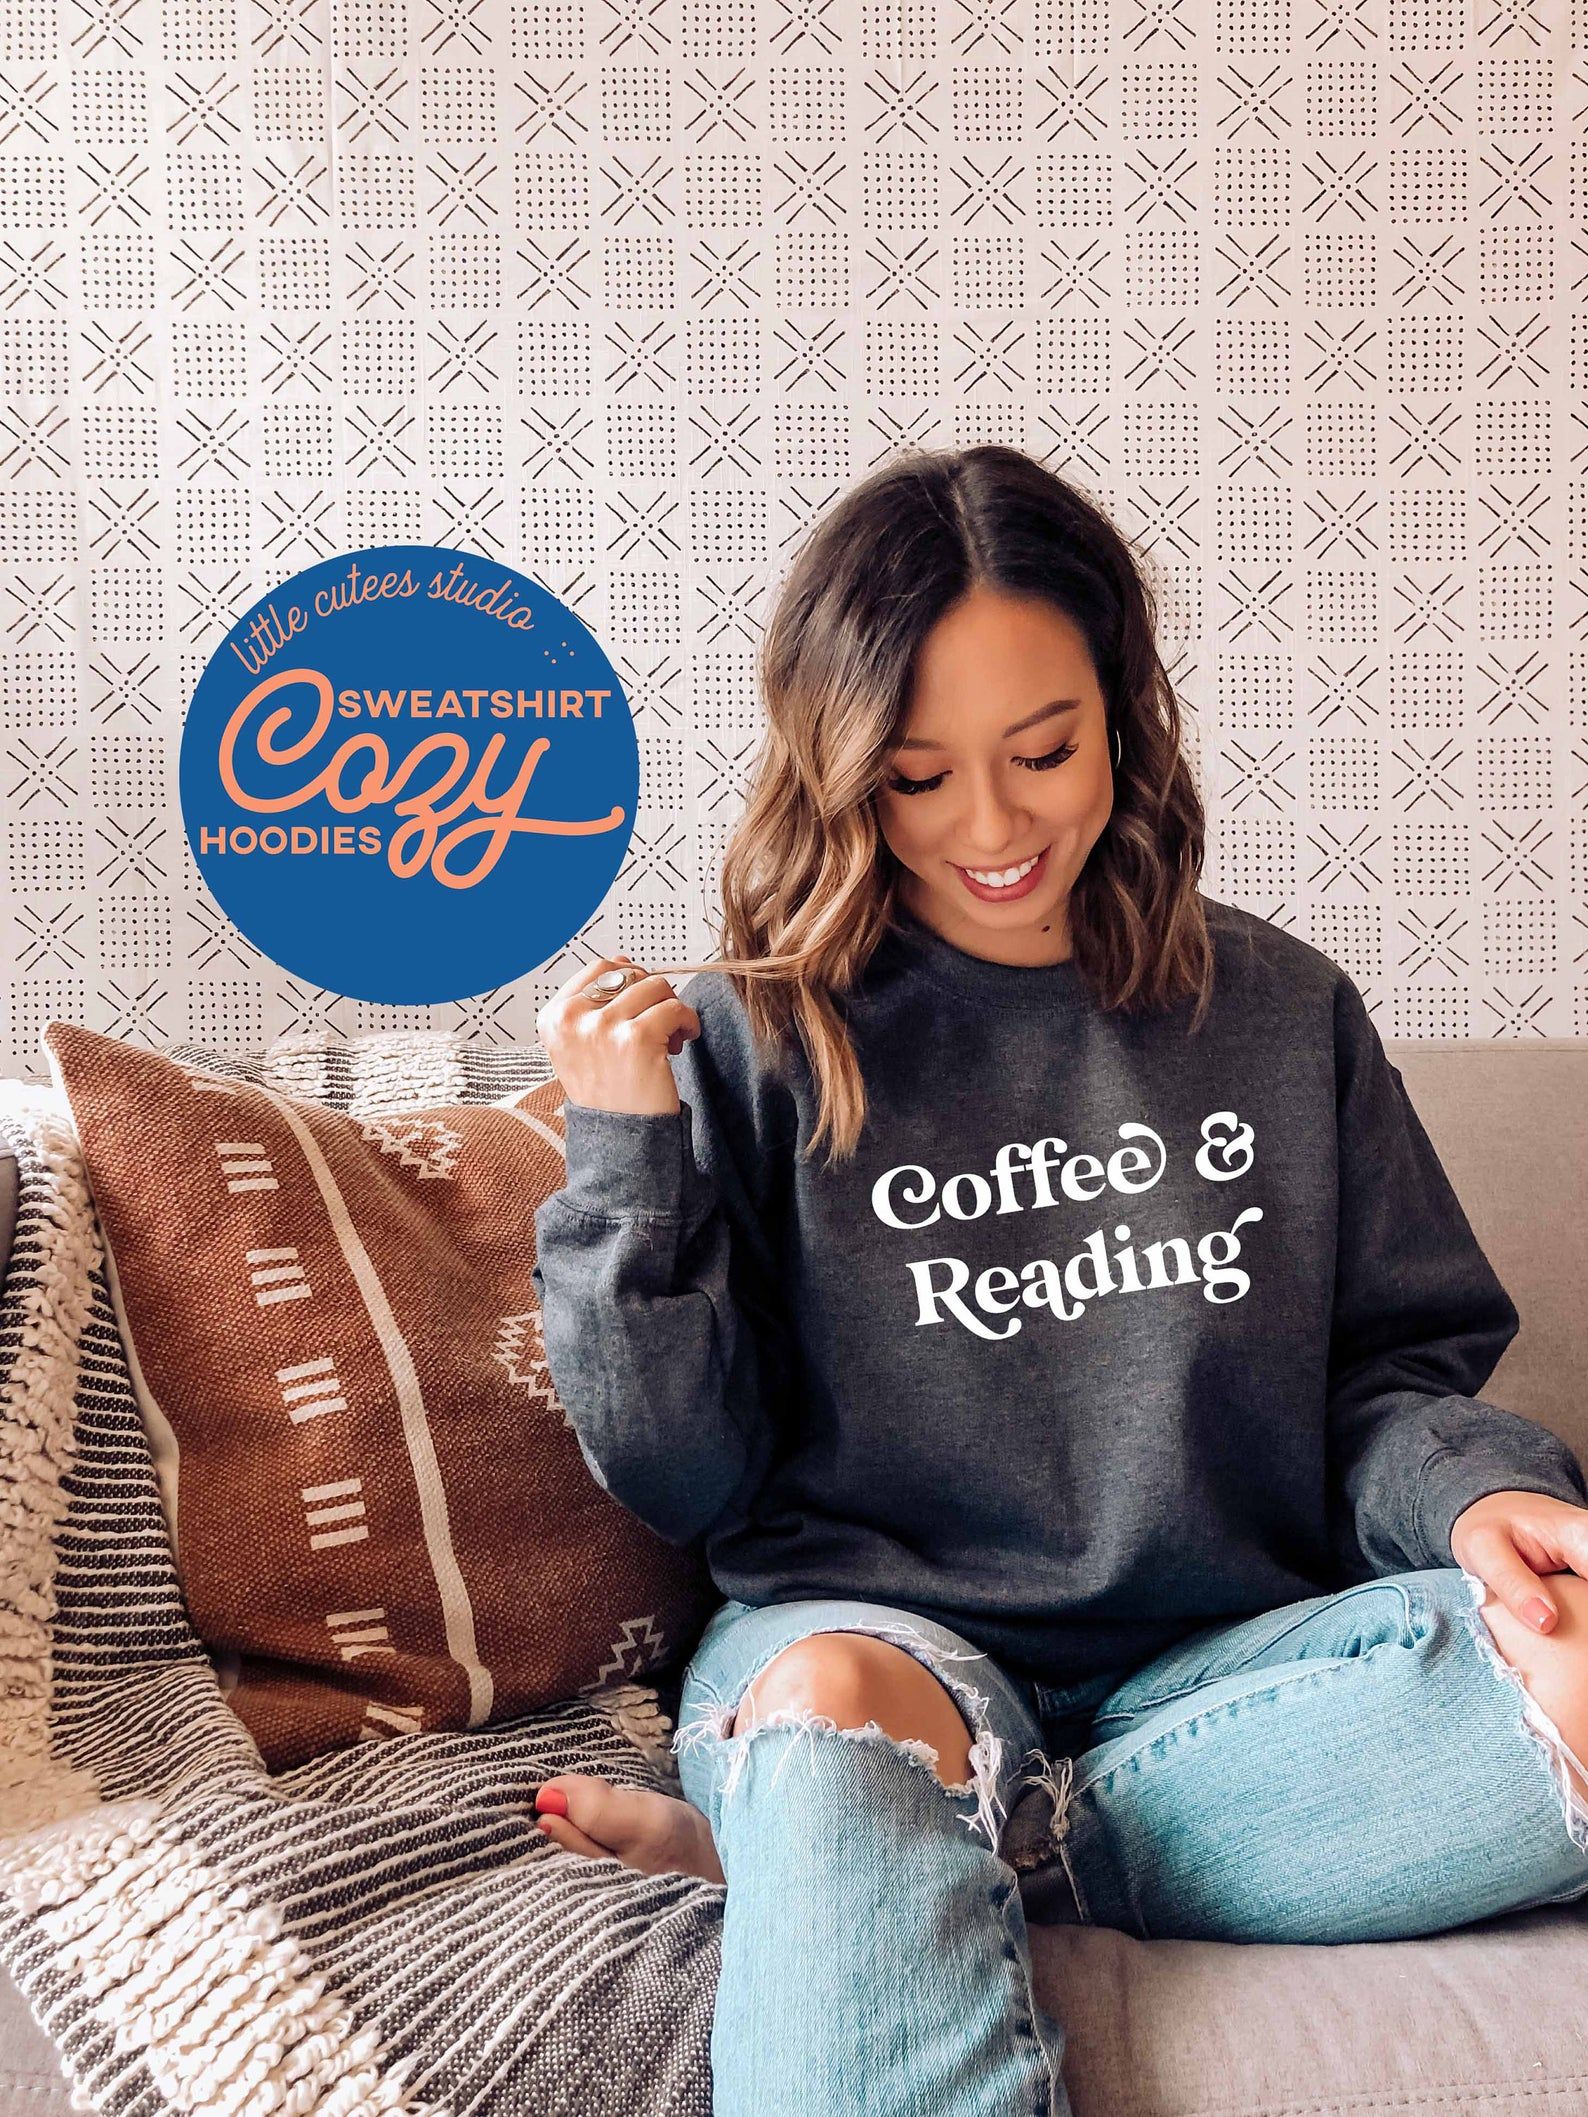 Image of a person in a gray sweatshirt reading 
"coffee & reading"